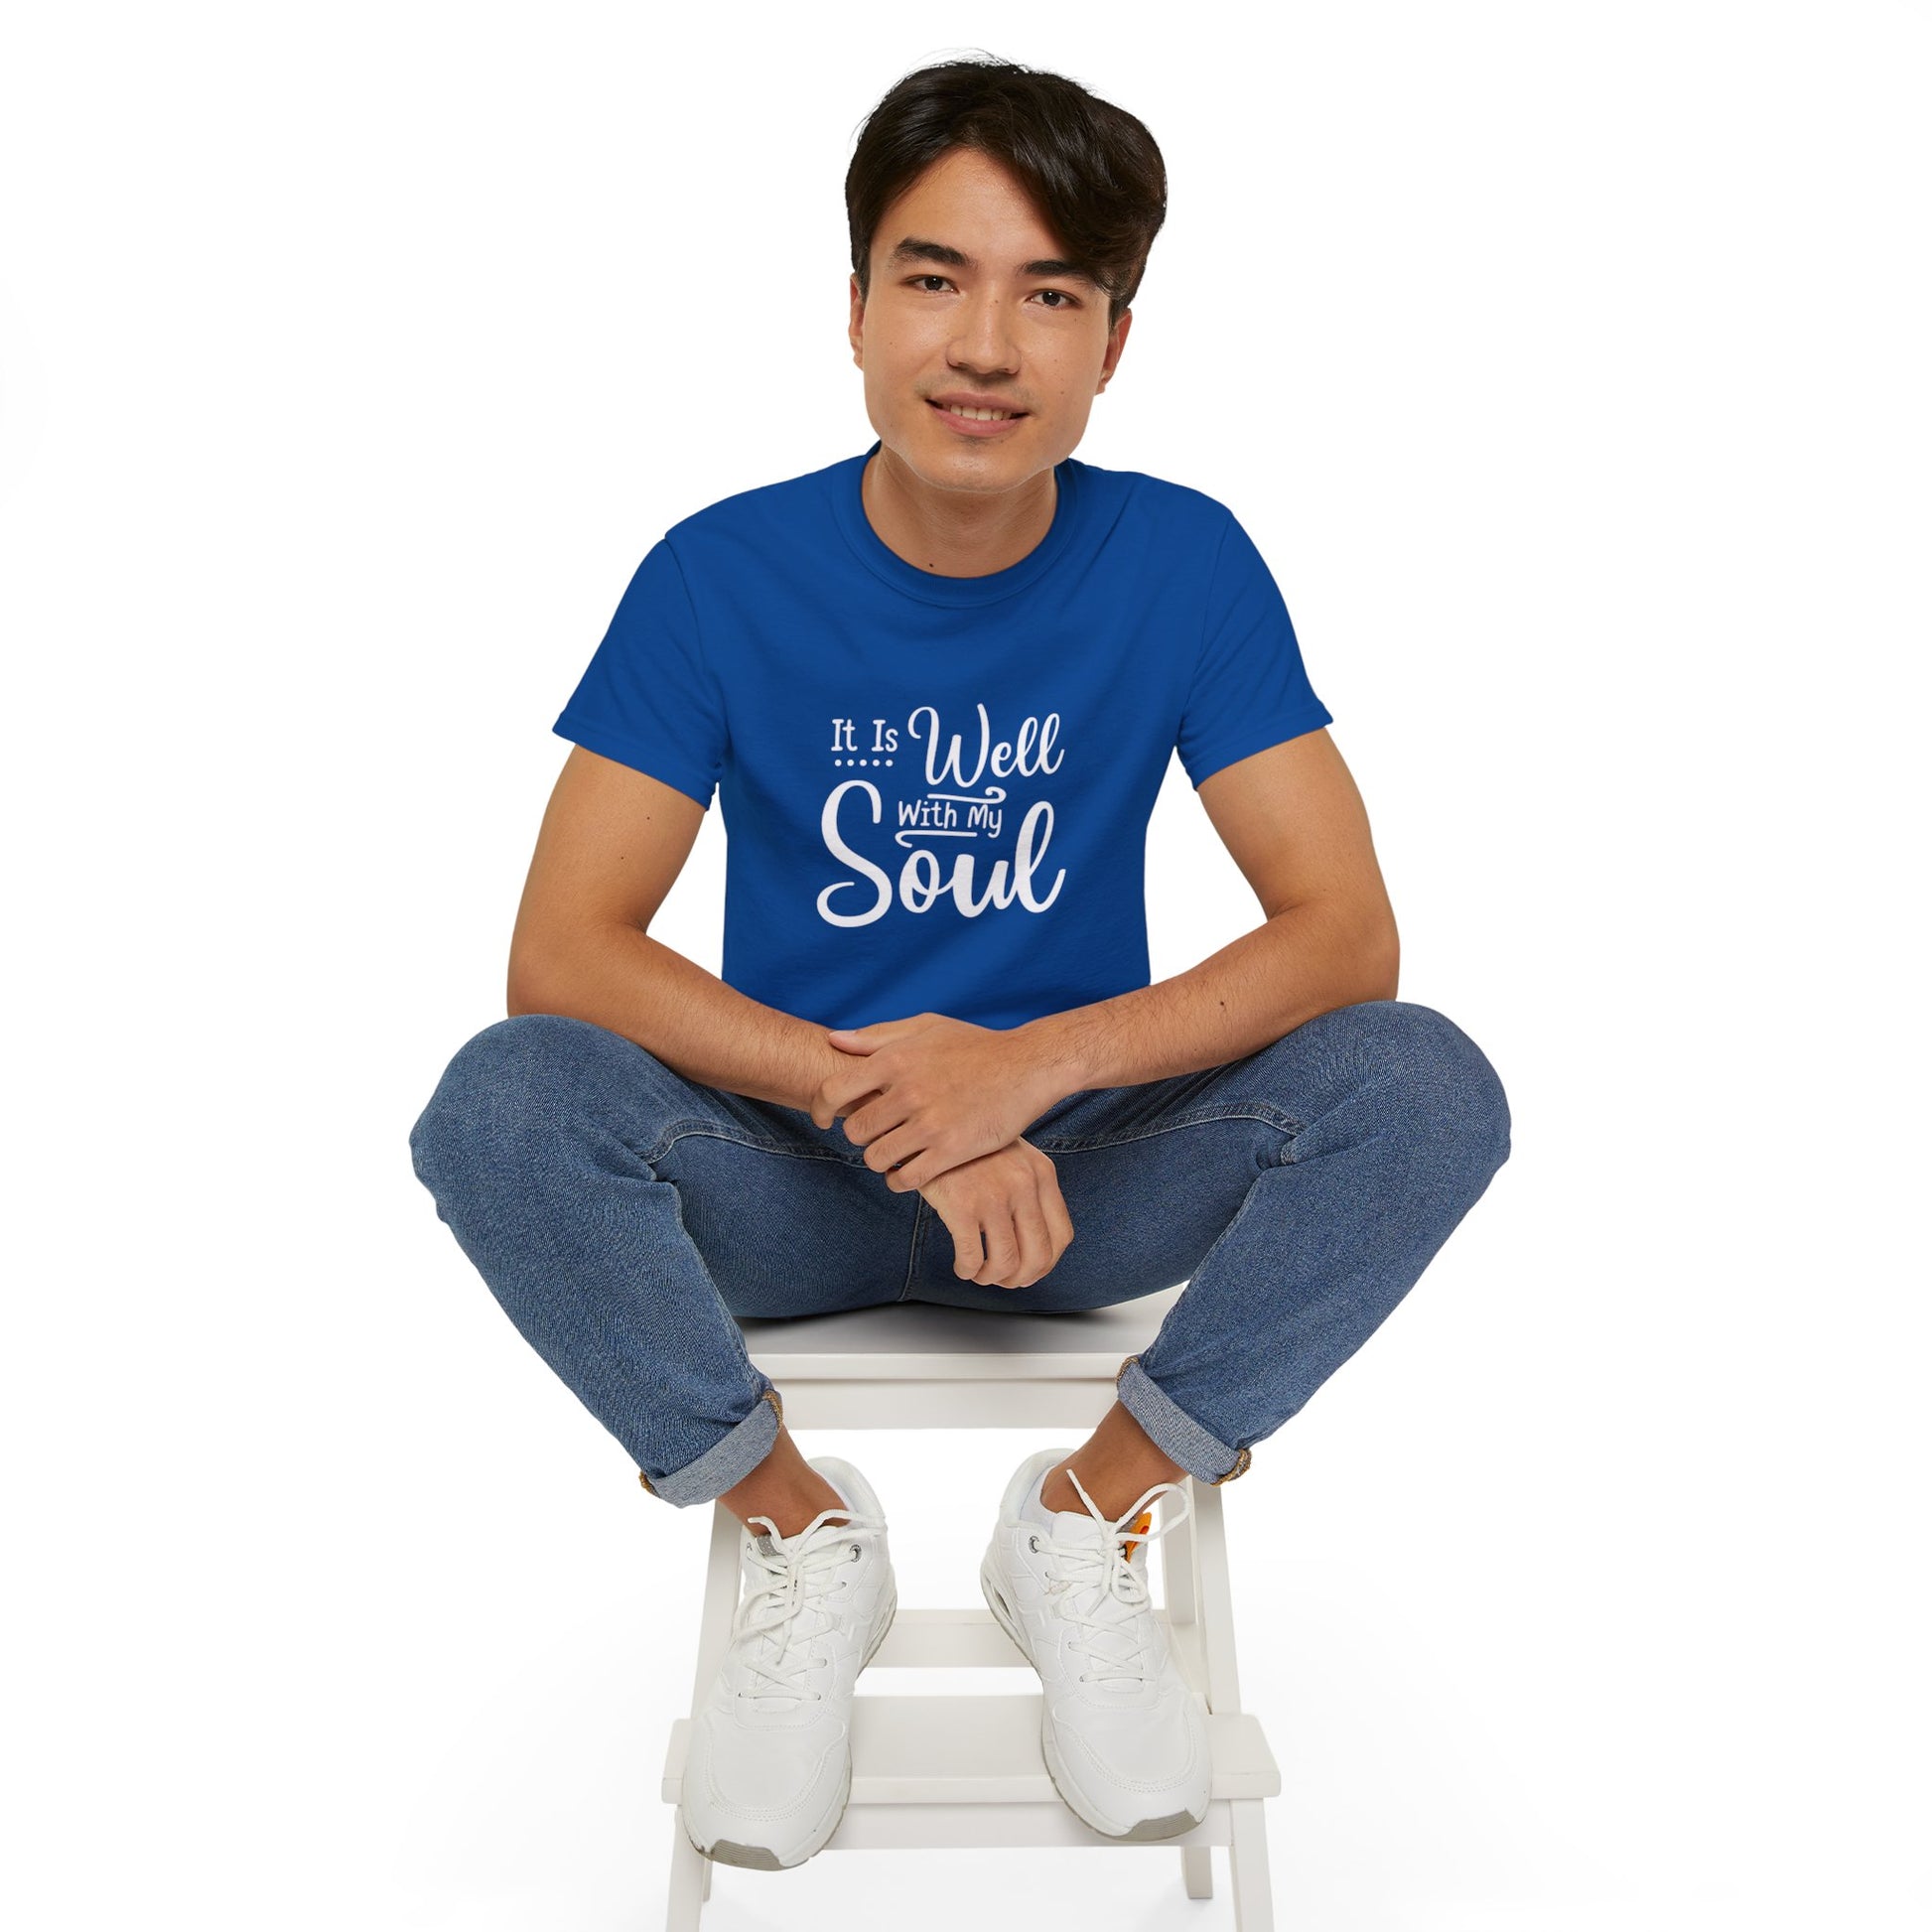 It Is Well With My Soul Unisex Christian Ultra Cotton Tee Printify